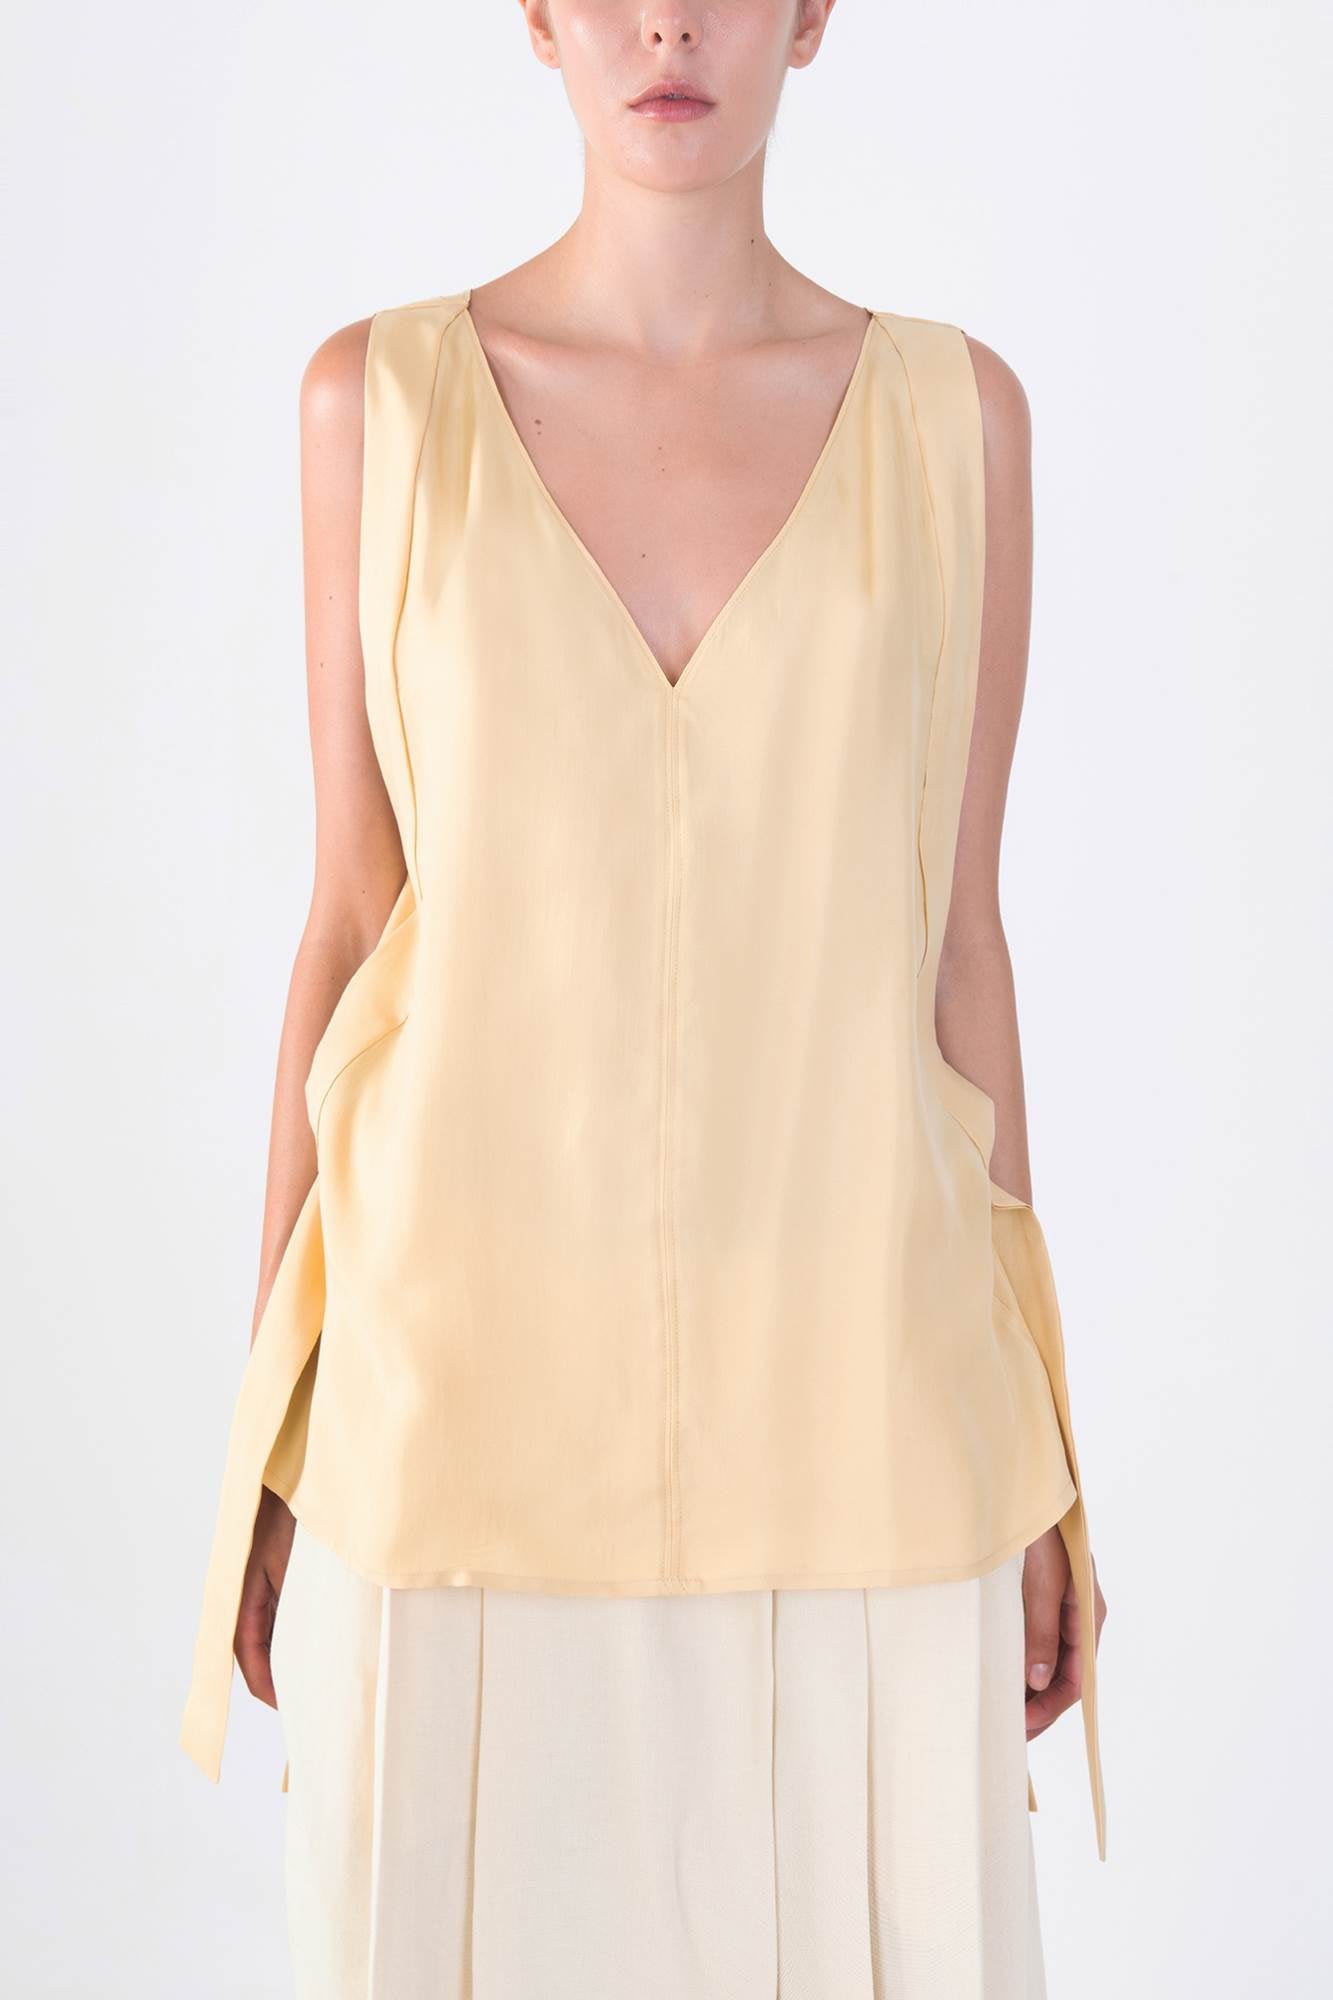 “V” neckline top with matching ribbons